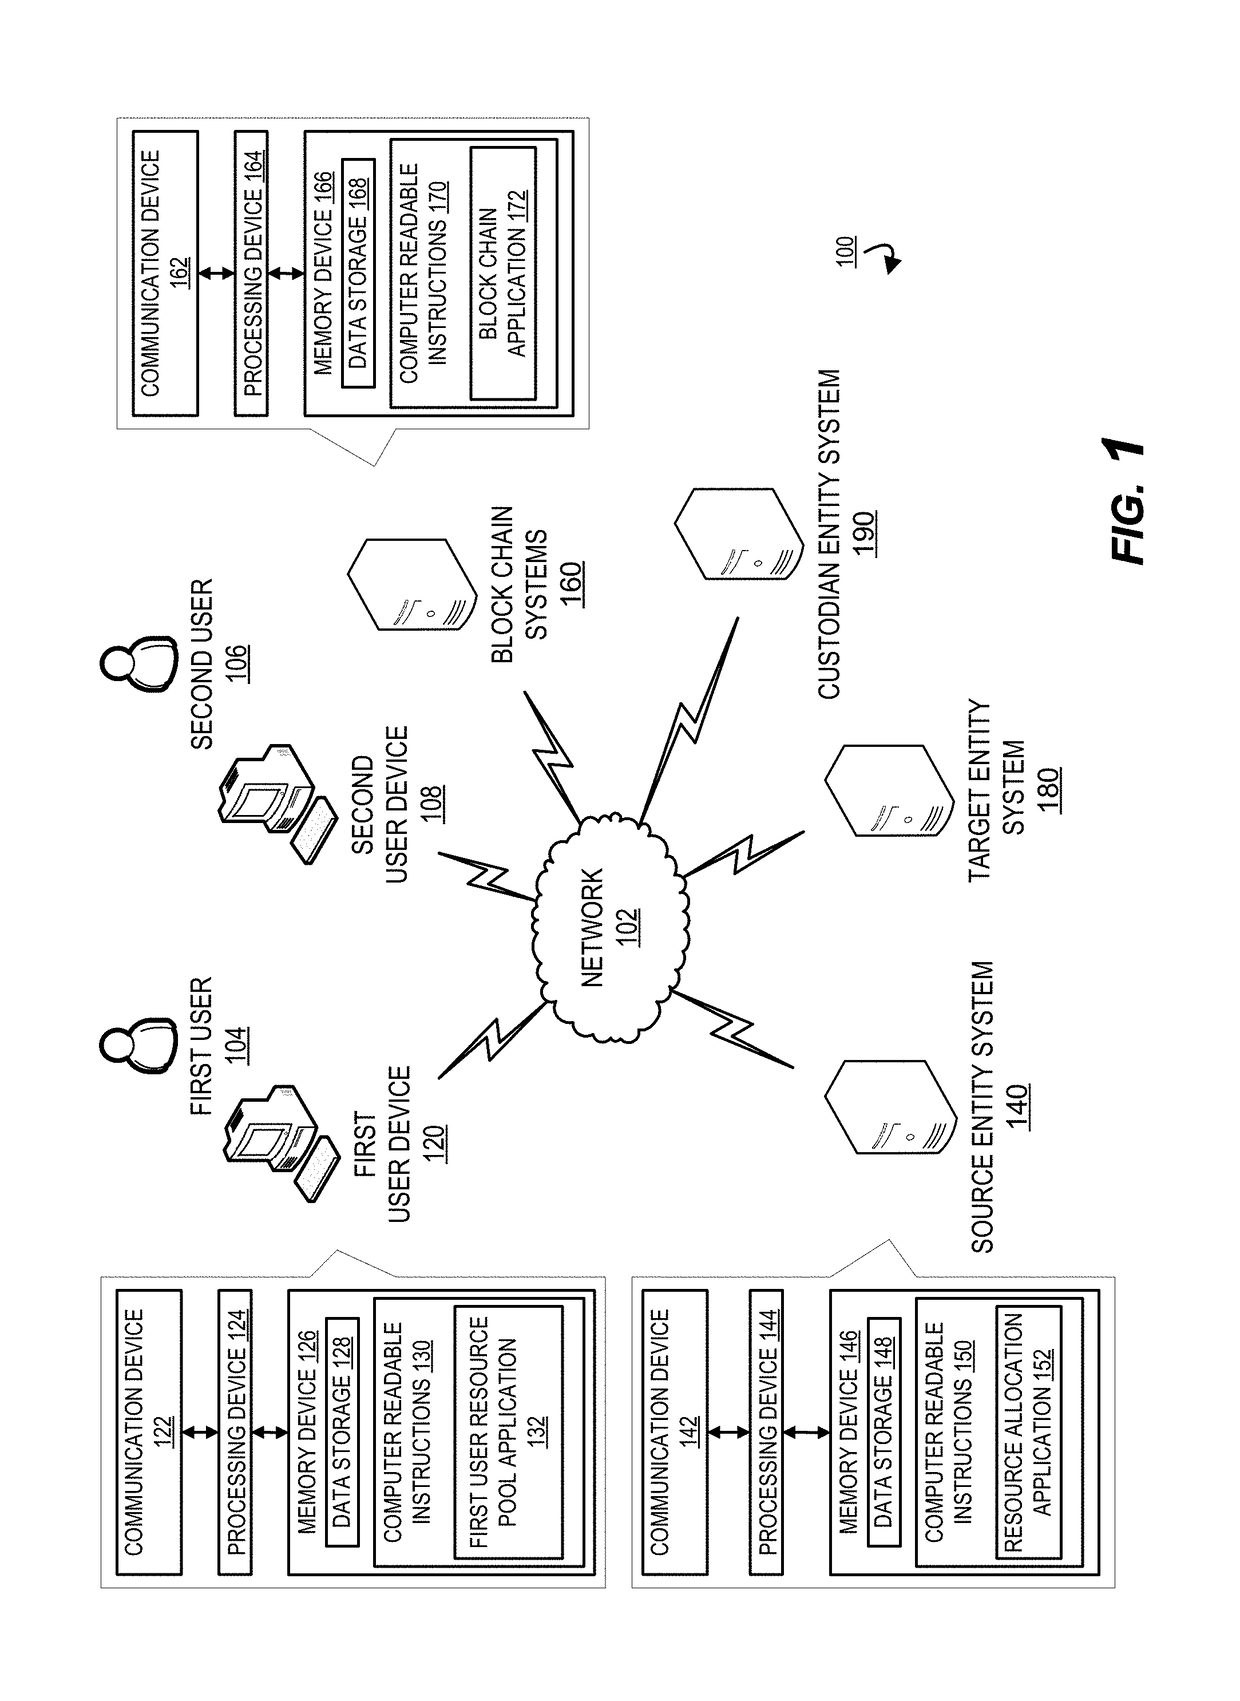 Resource allocation and transfer in a distributed network